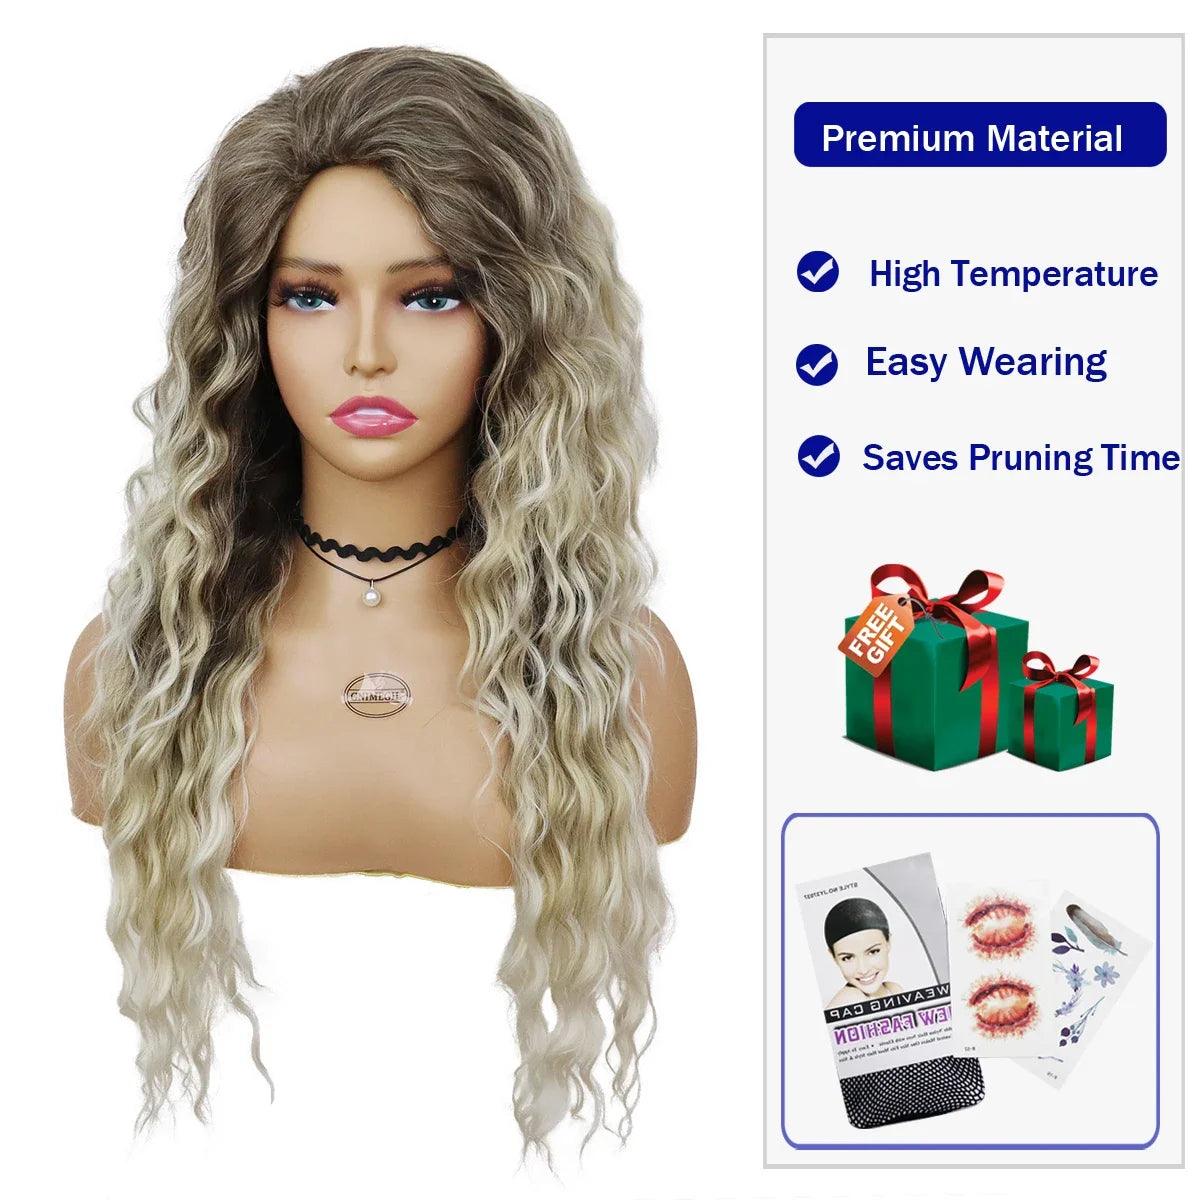 Blonde Ombre Wavy Wig with Voluminous Curls for Women - Long Synthetic Hair for Daily Wear and Parties  ourlum.com   